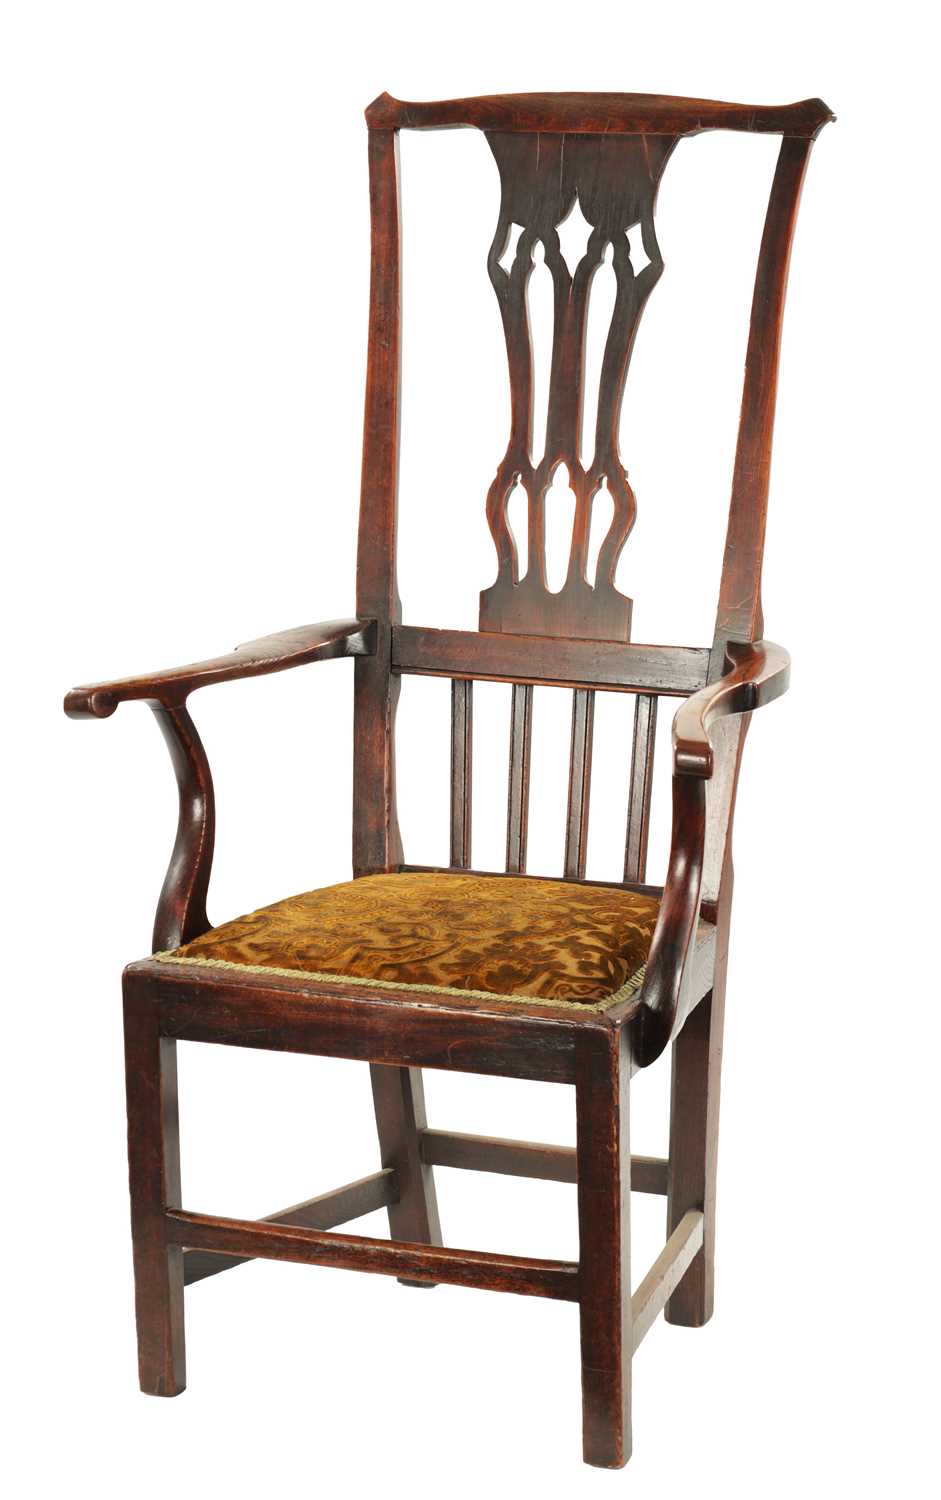 AN UNUSUAL 18TH CENTURY TALL BACK COUNTRY ELM SPLAT BACK ARMCHAIR